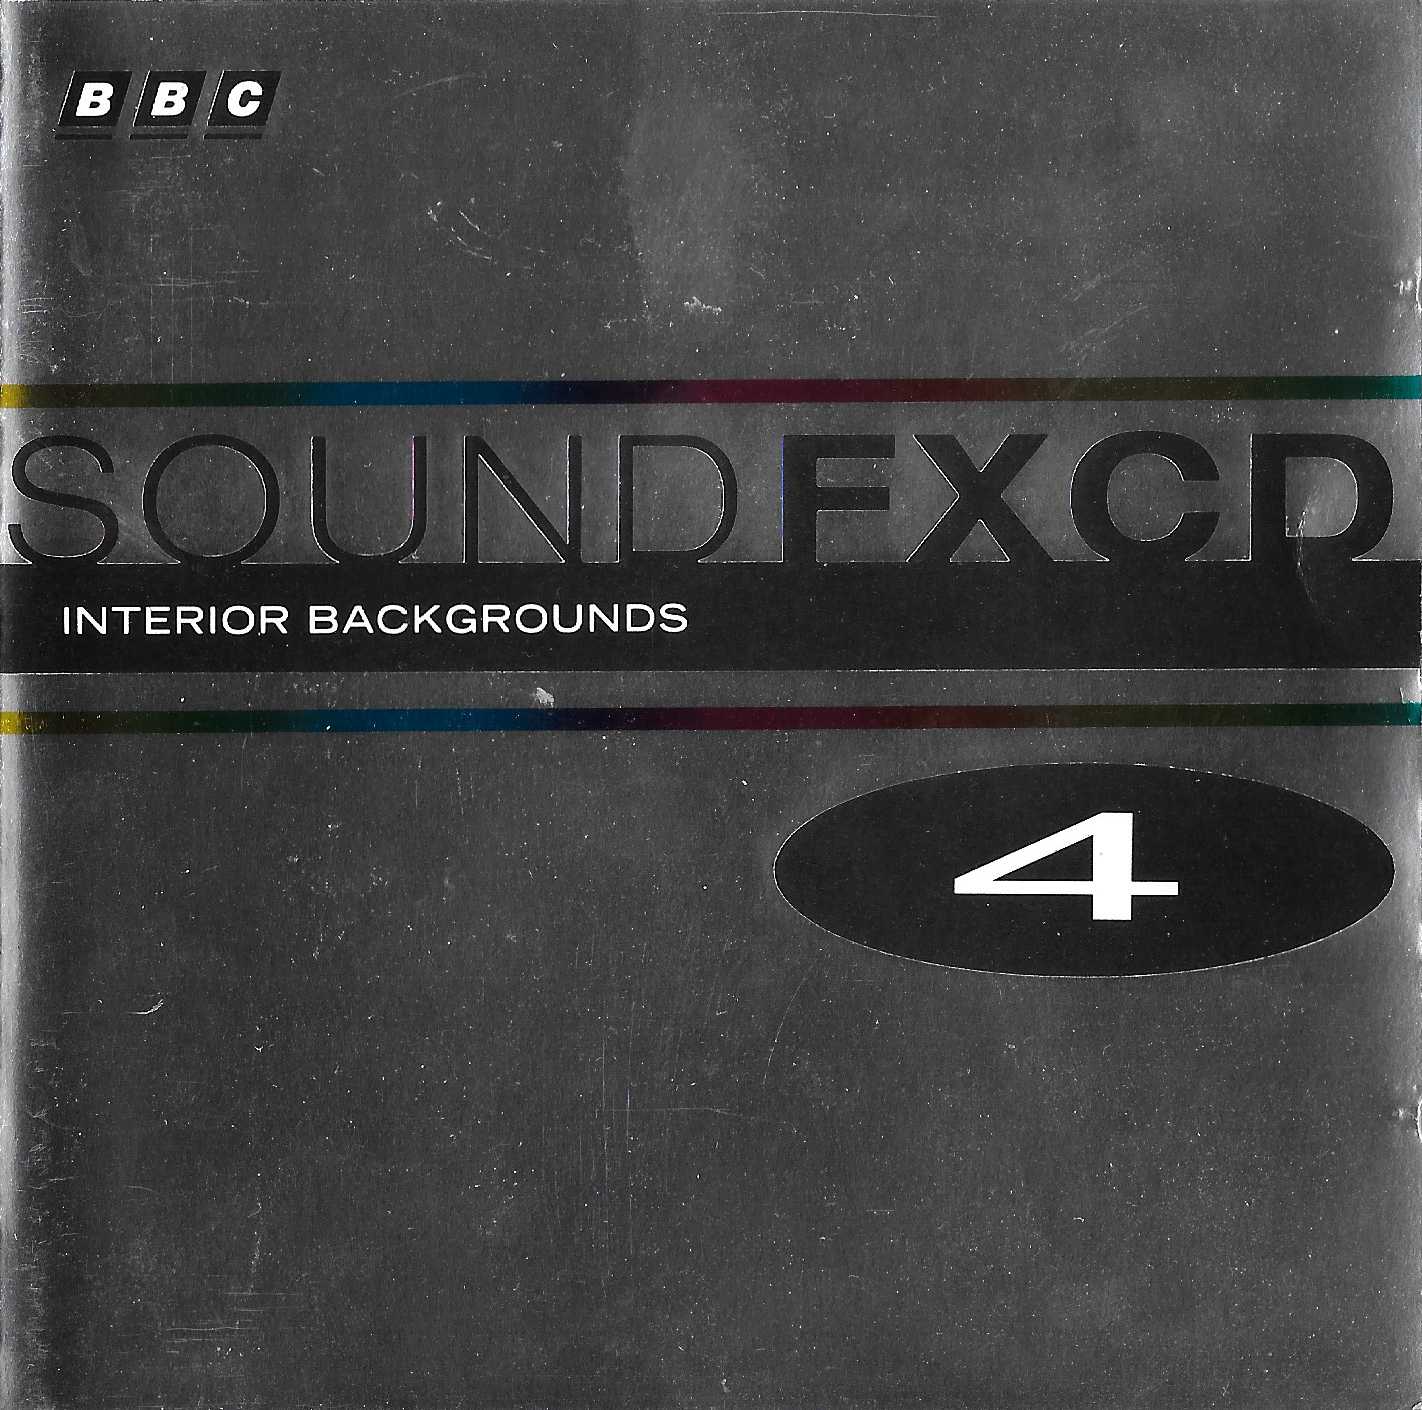 Picture of BBCCD SFX004 Interior backgrounds by artist Various from the BBC cds - Records and Tapes library